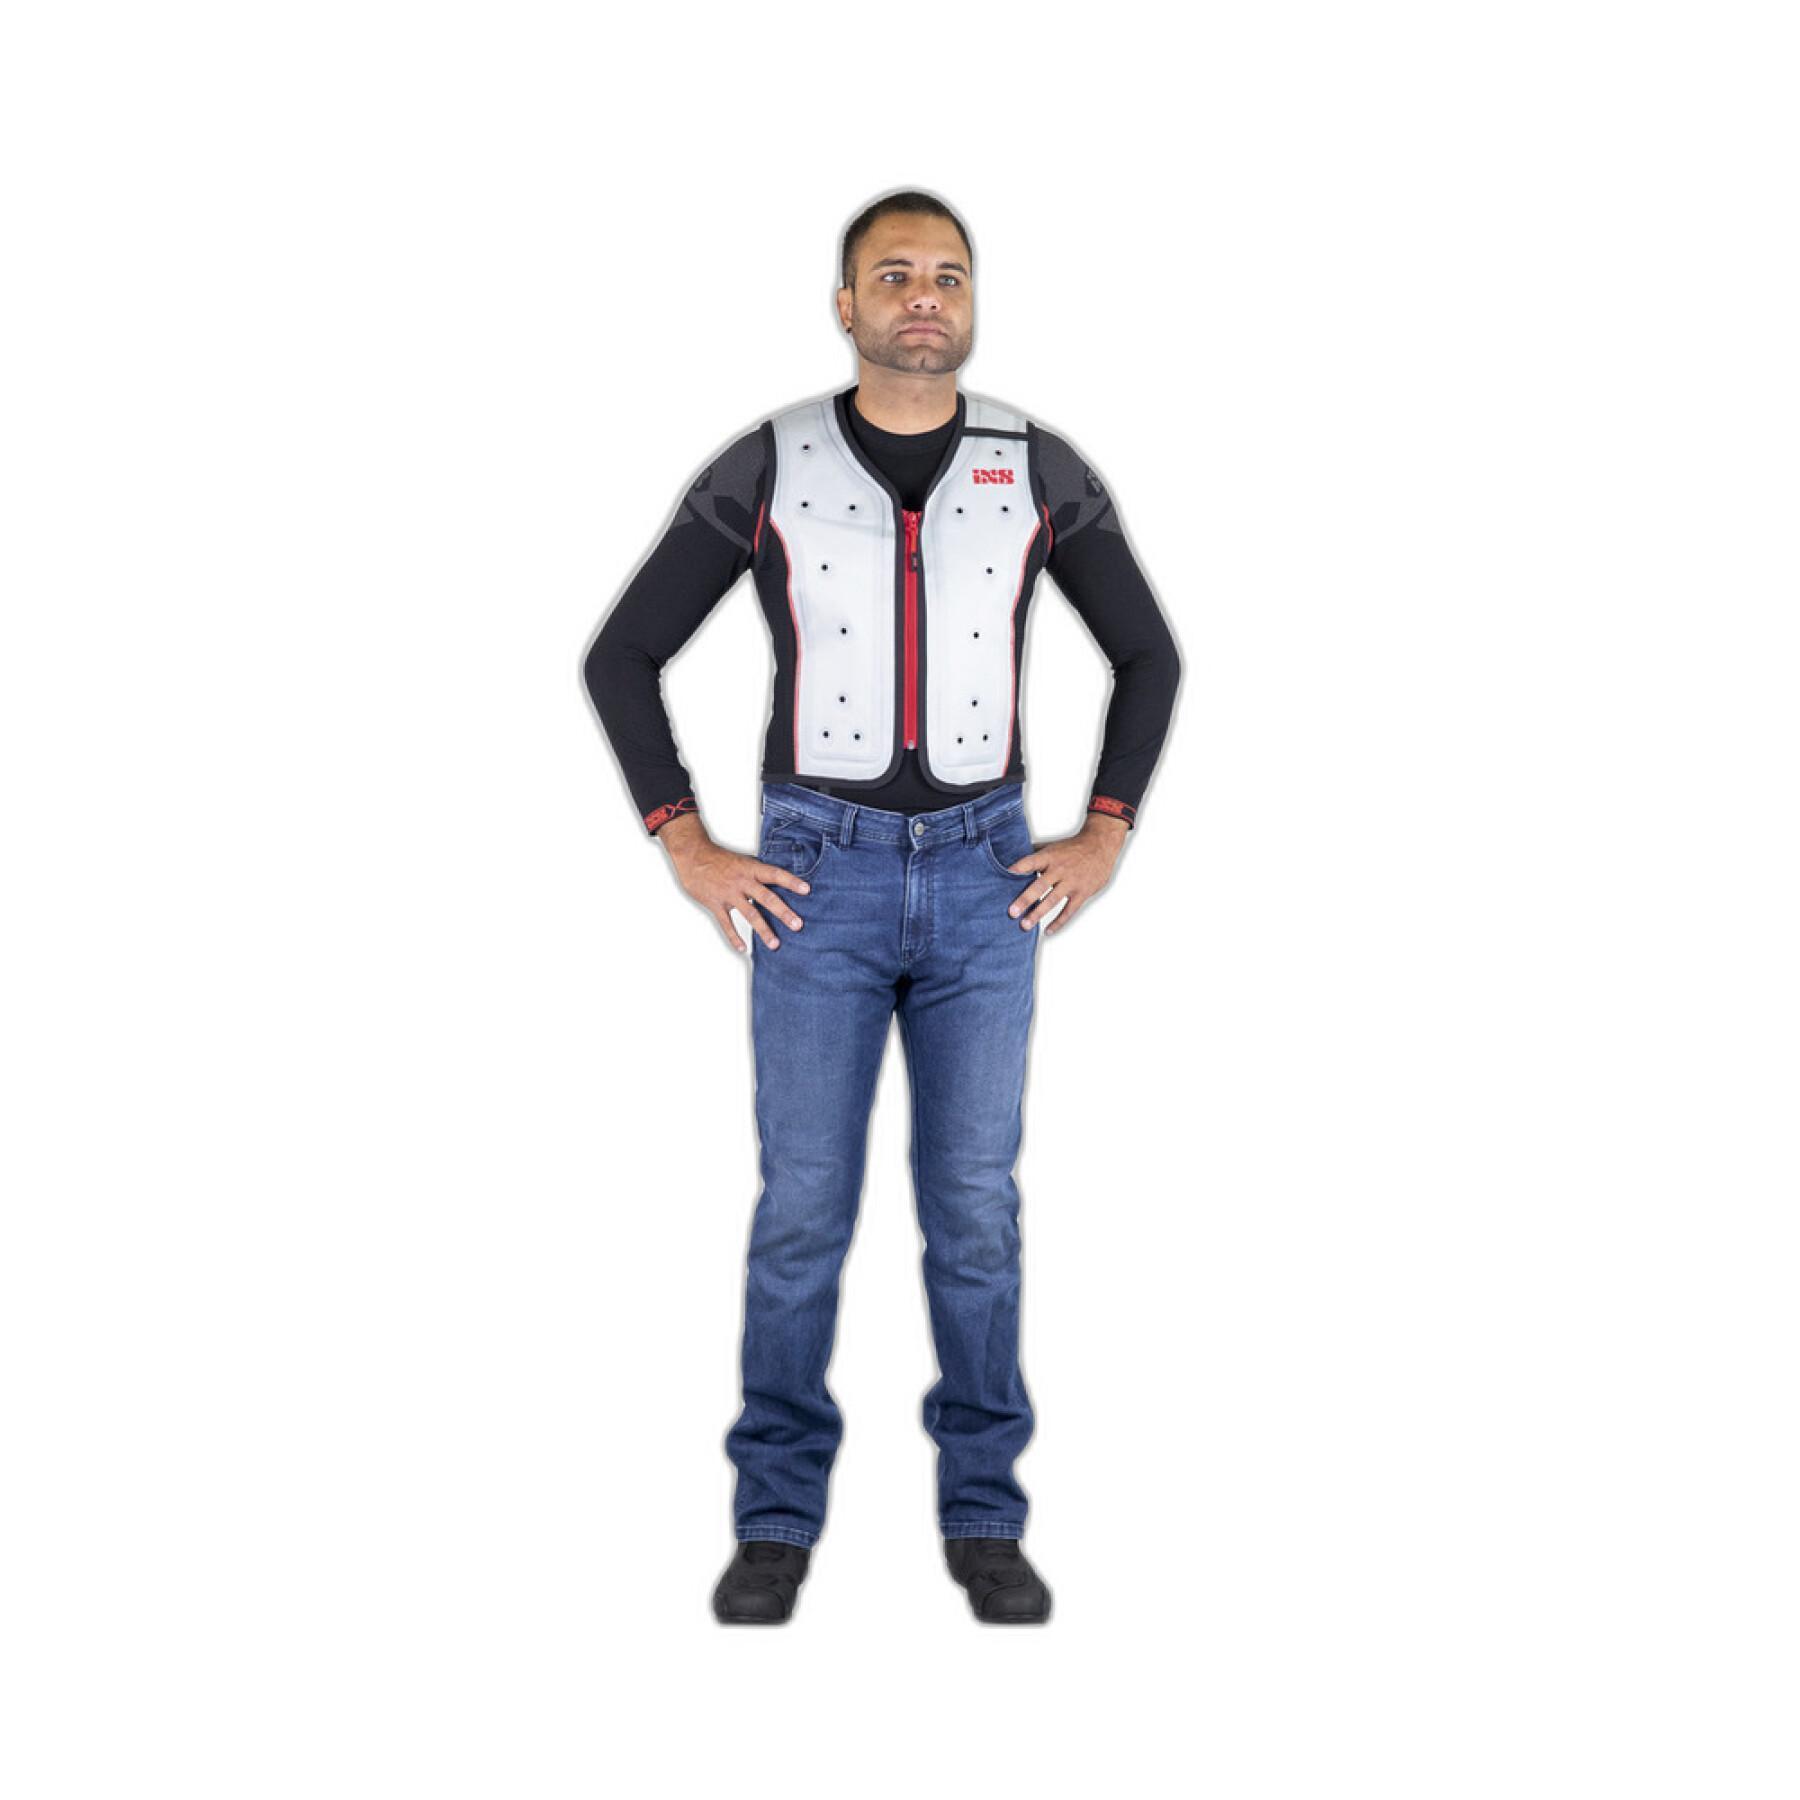 Cooling vest IXS bodycool dry